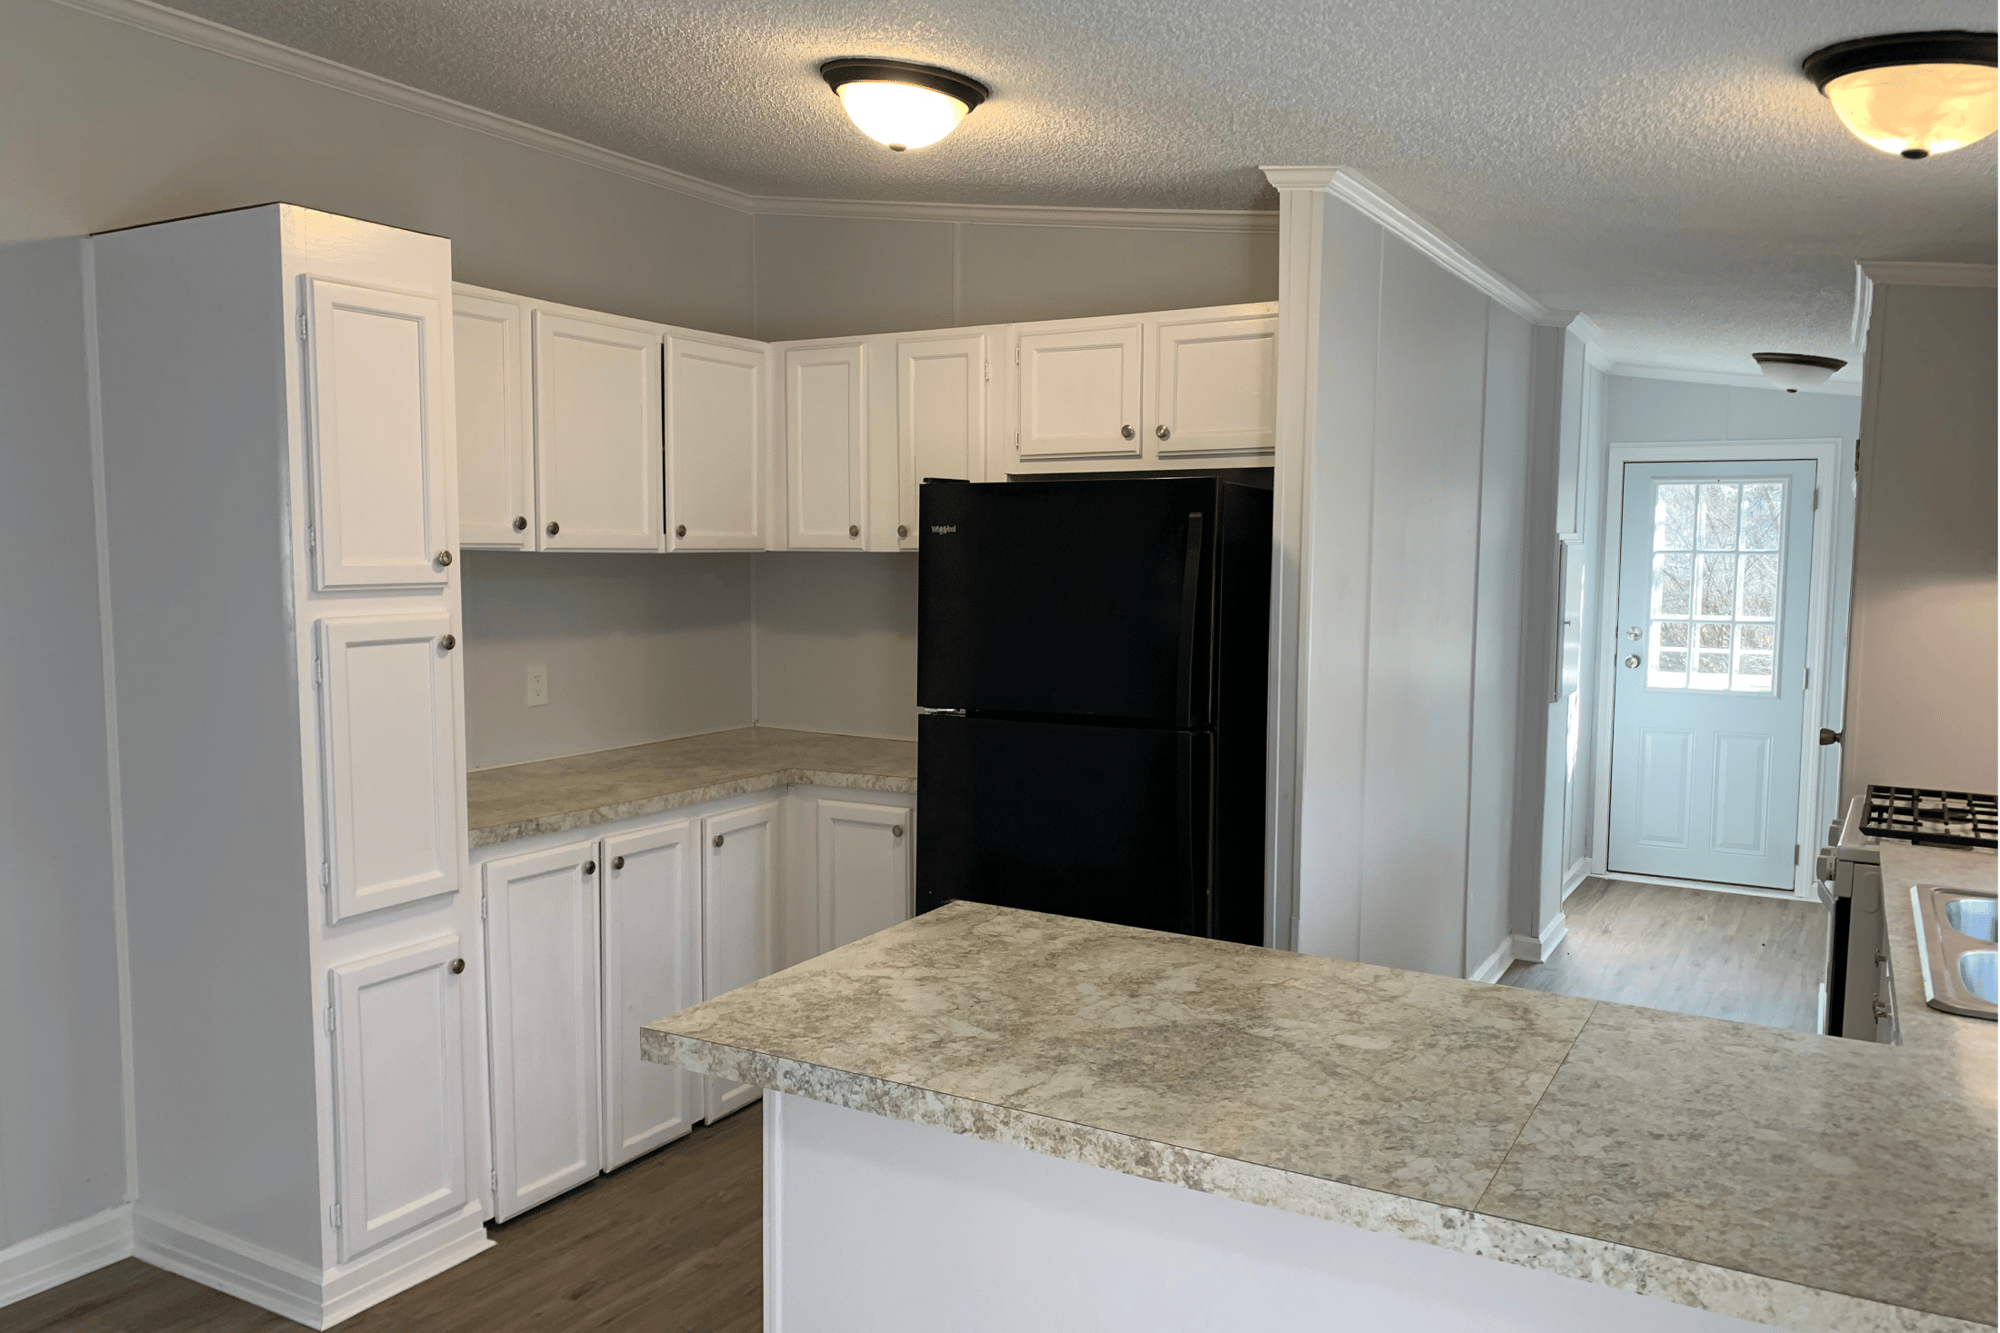 Sunset Valley Interior of Affordable Manufactured Home Image